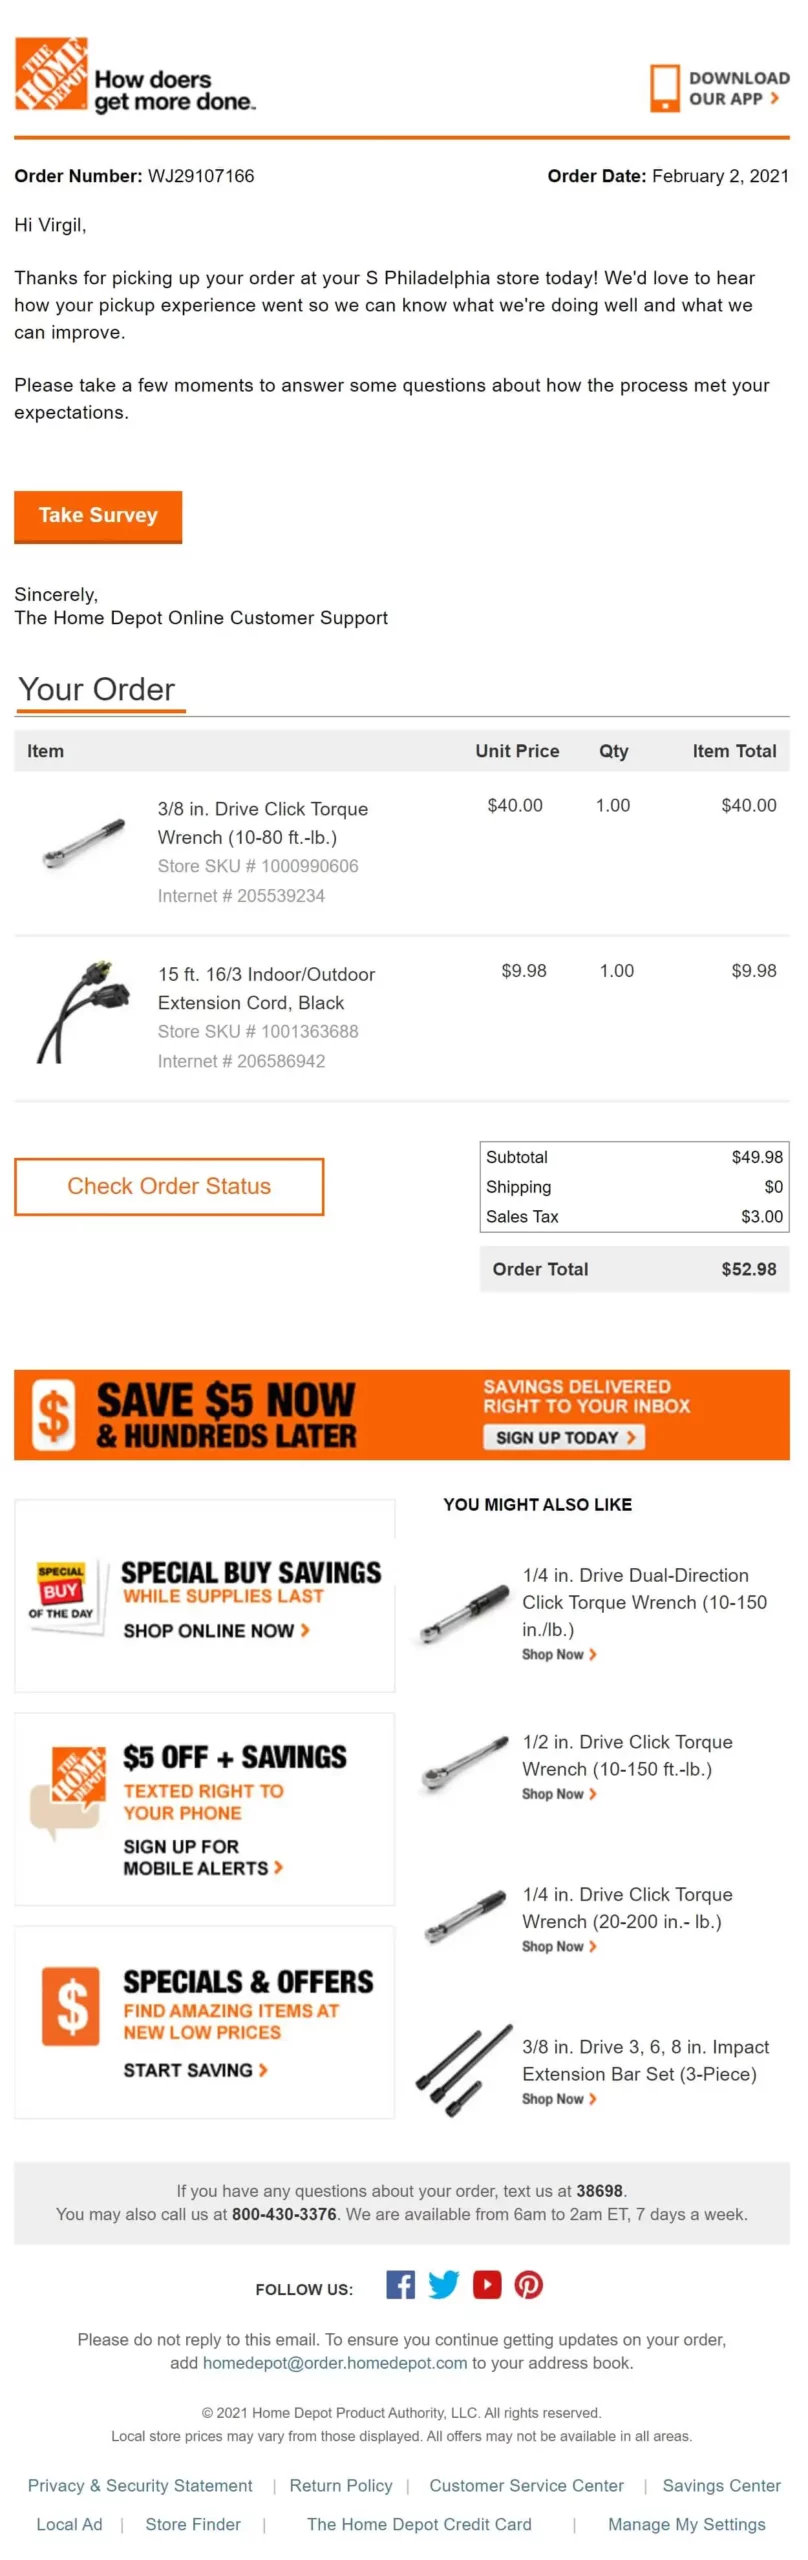 homedepot order shipped email